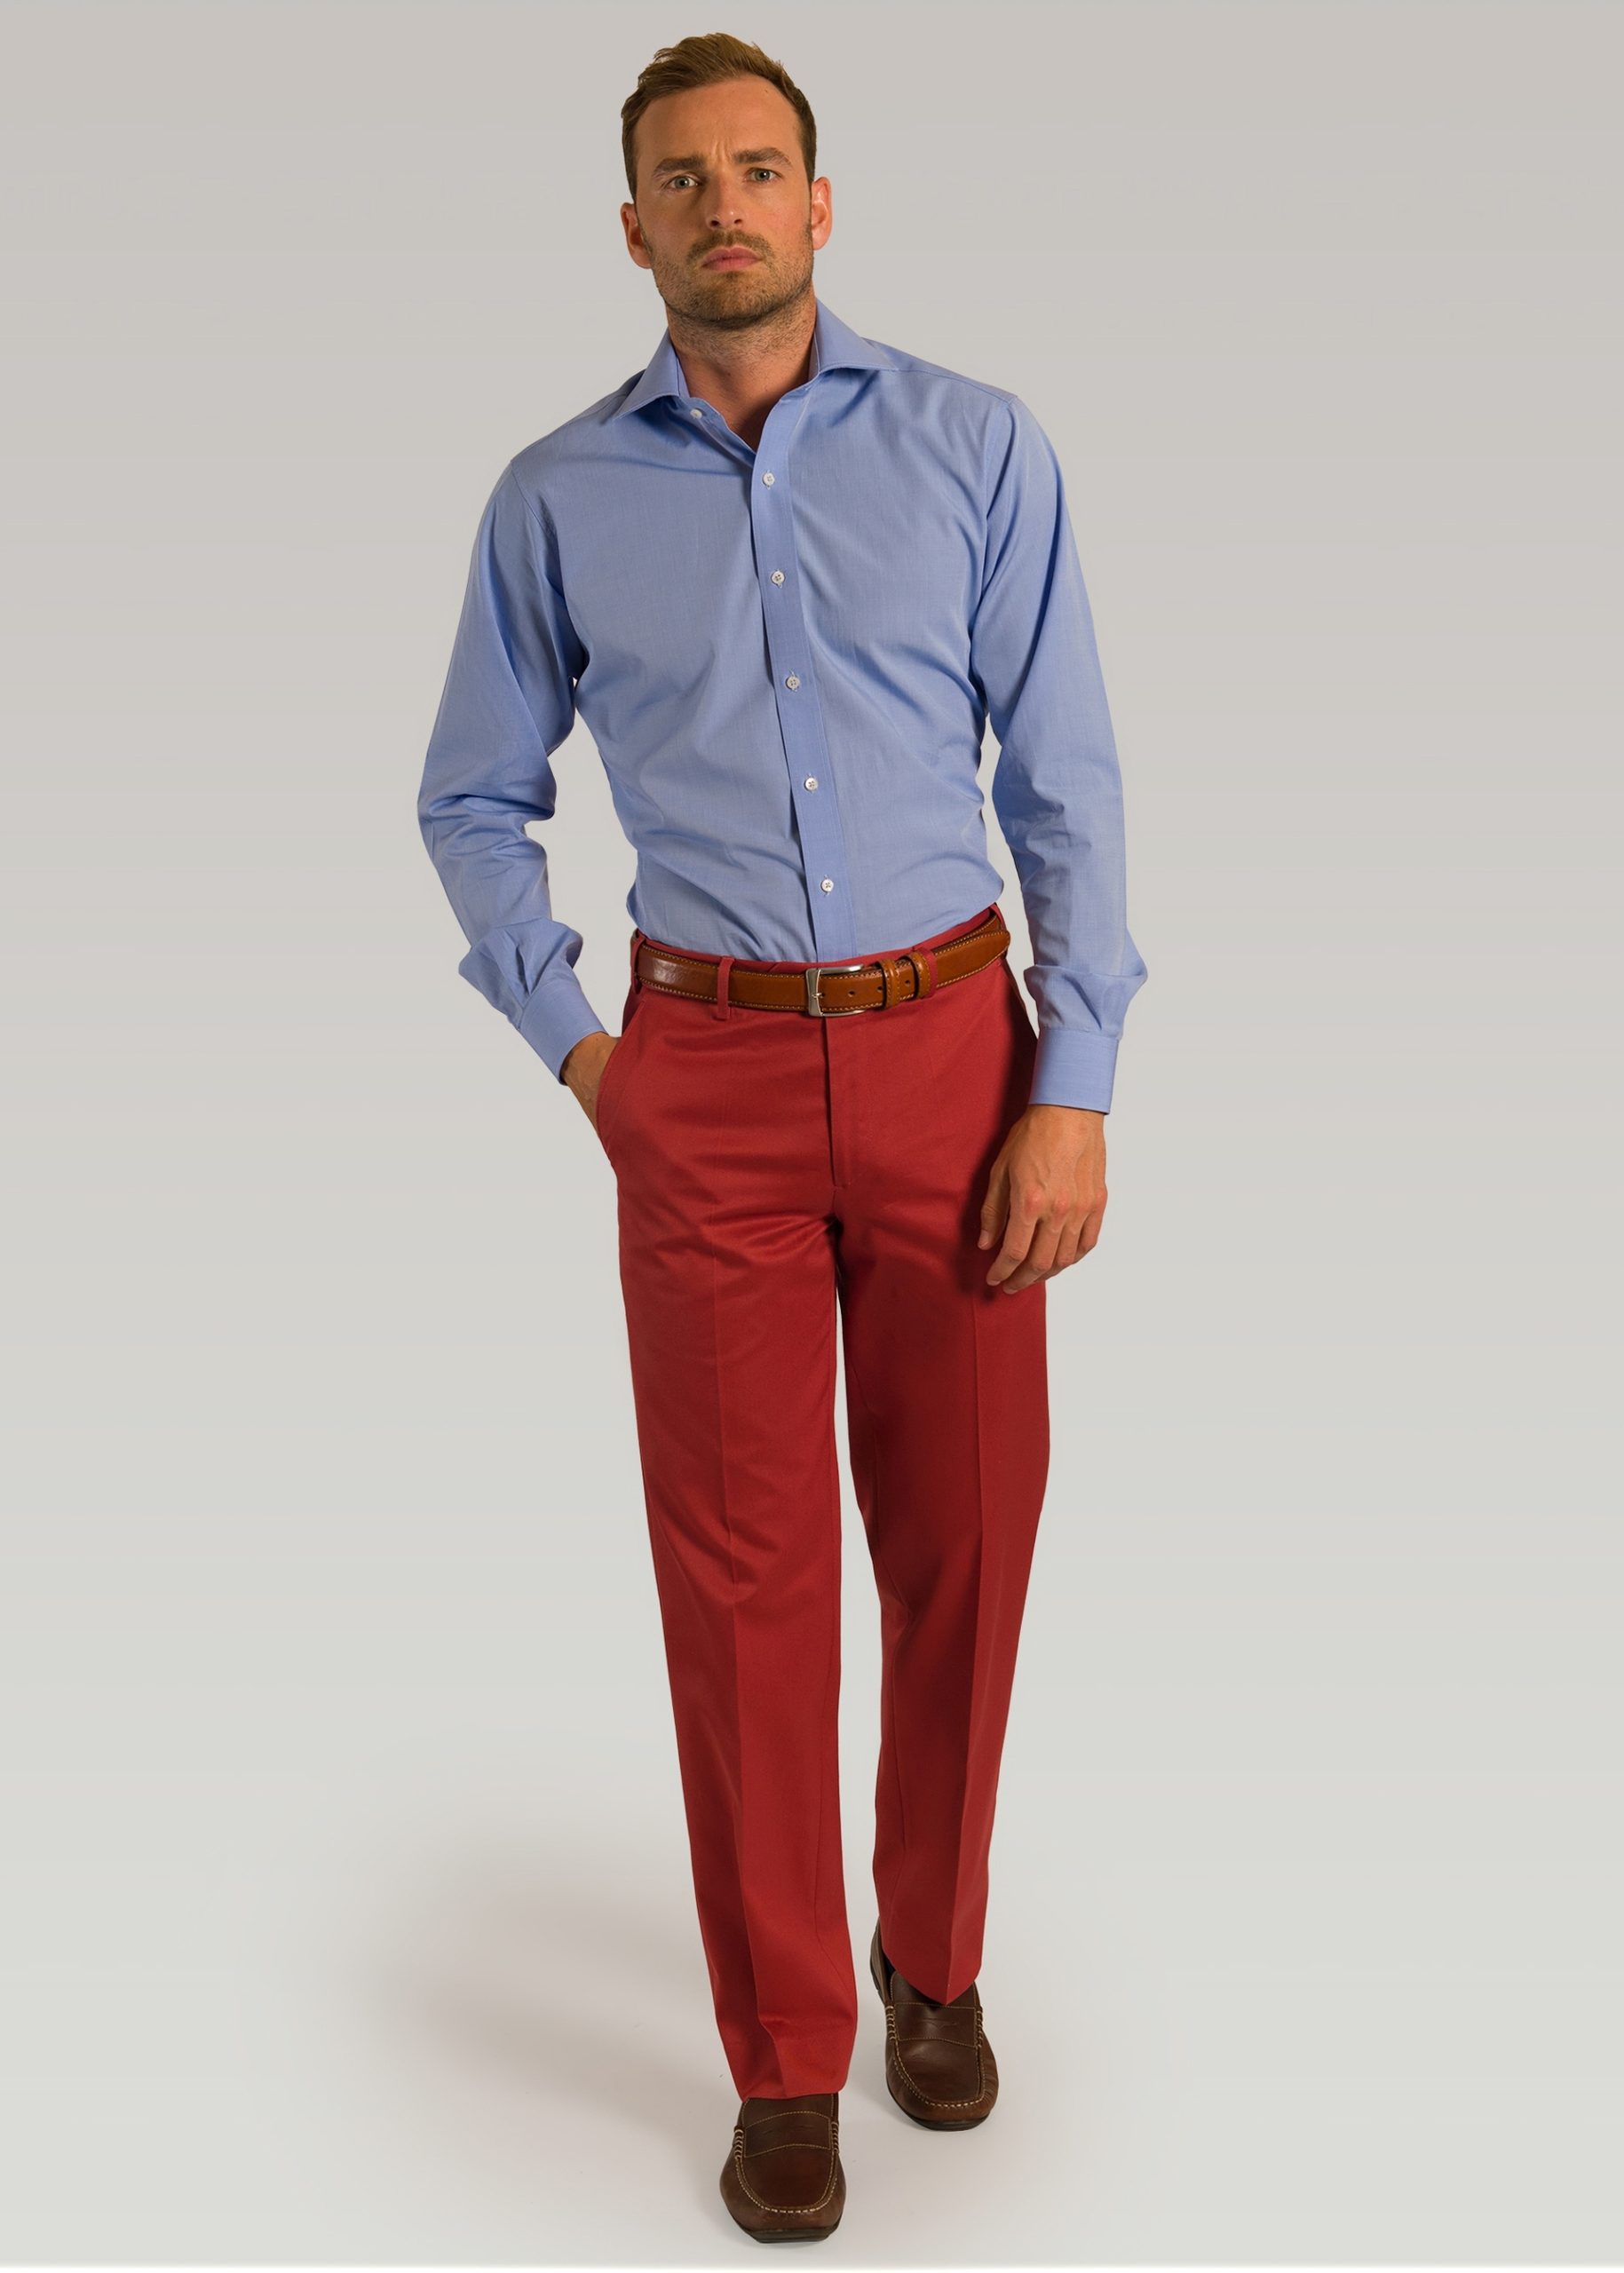 Men’s pink cotton trouser styled with brown leather trousers